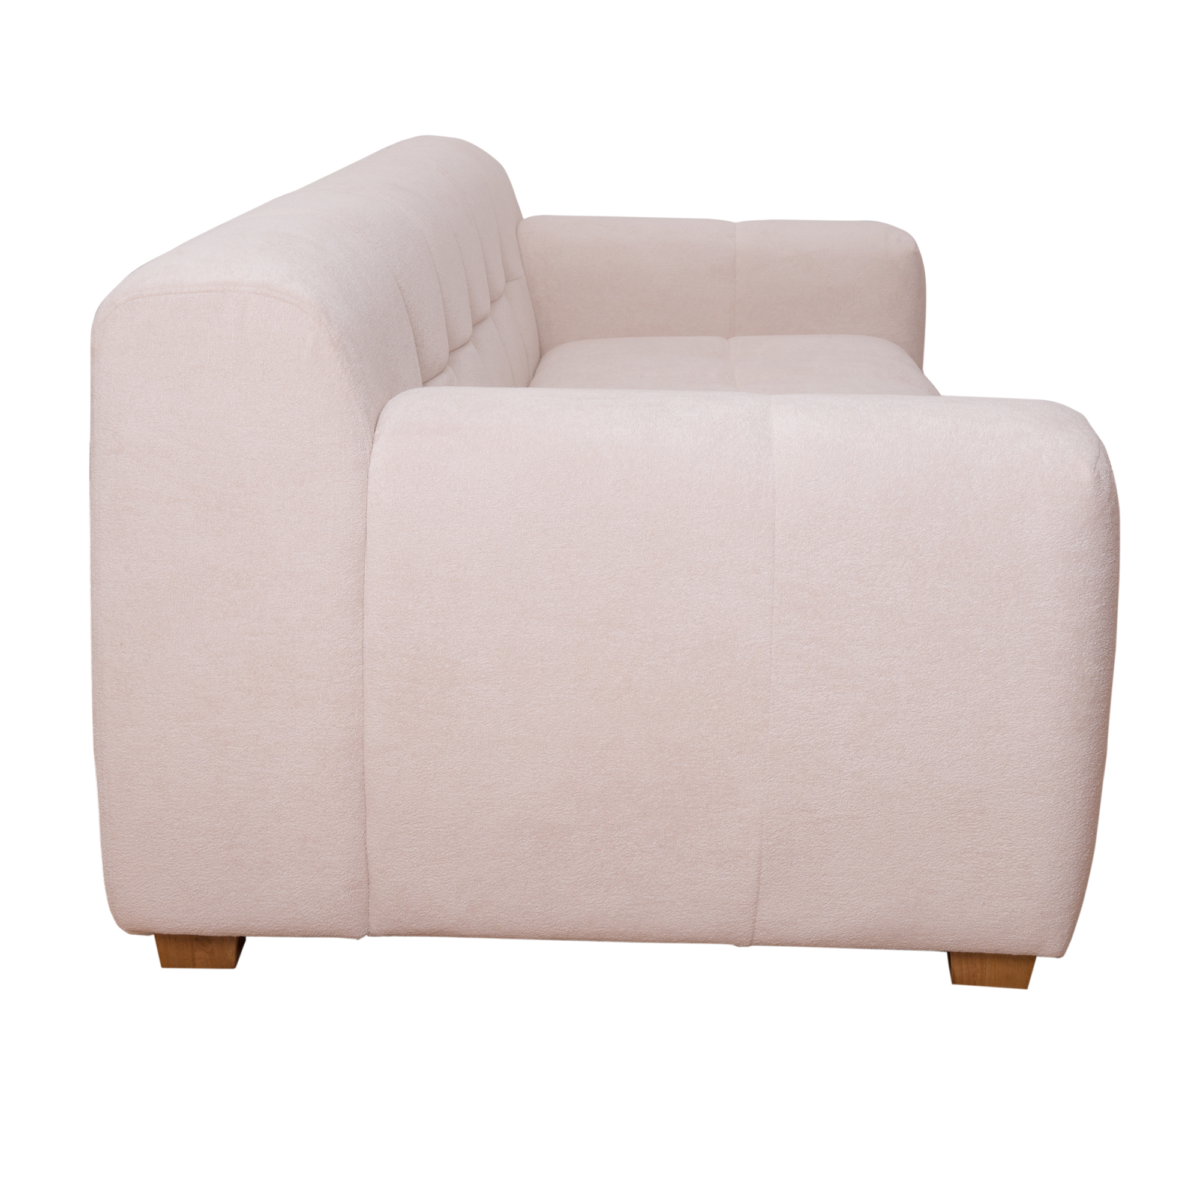 Lili-3-Seater-Upholstered-Sofa-CO058-3S-6